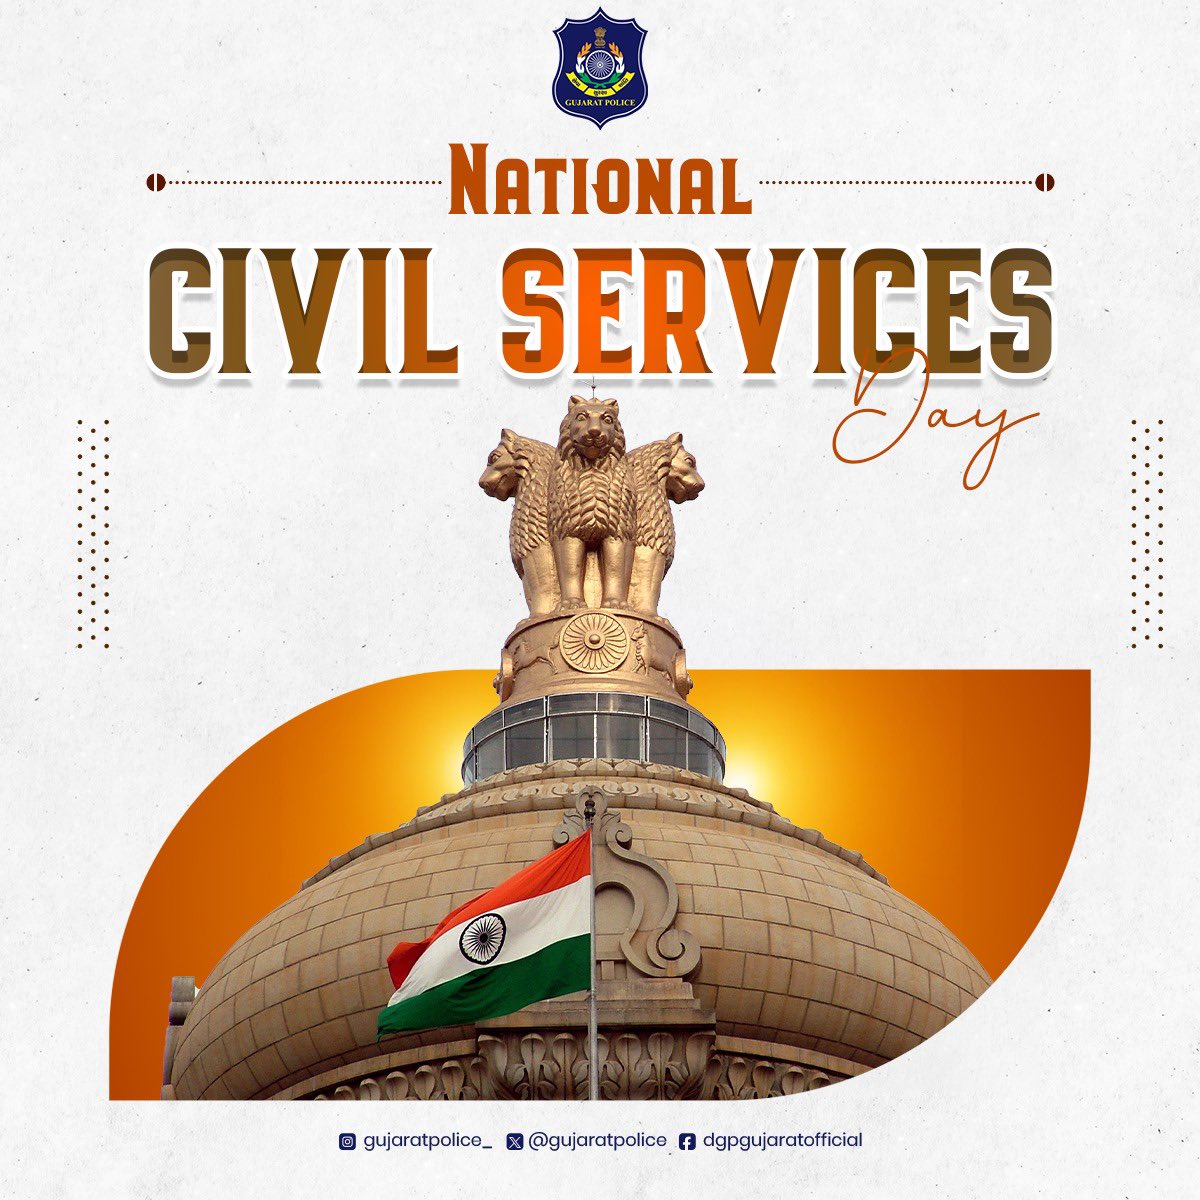 Best wishes to all Civil Servants on the occasion of Civil Services Day. Jai Hind #CivilServices #NationFirst #GujaratPolice #CivilServiceDay